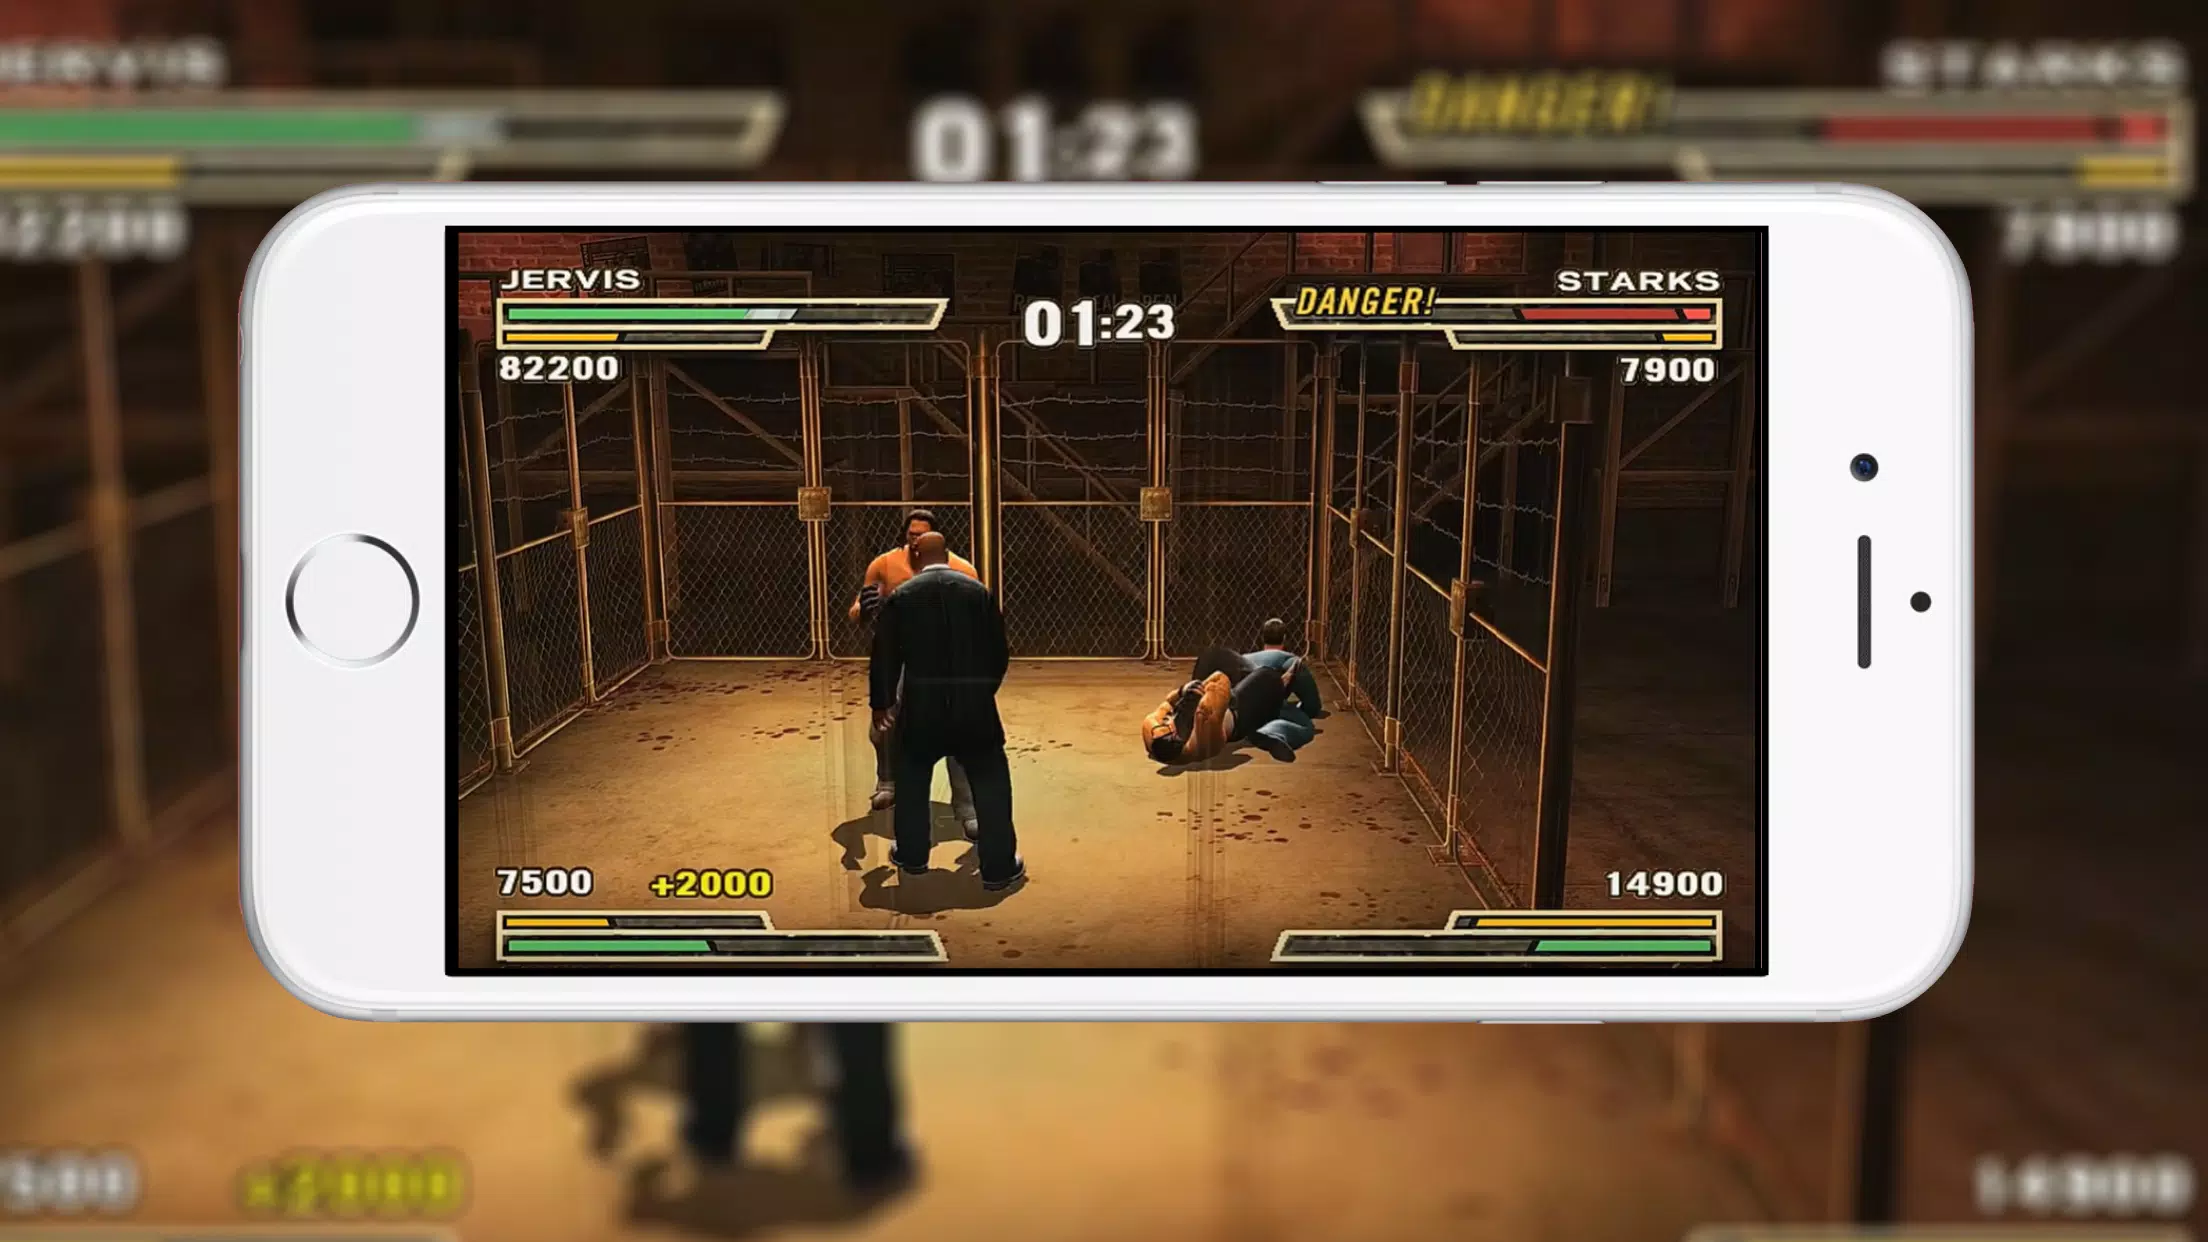 Def Jam Fight For NY Walkthrough APK for Android - Latest Version (Free  Download)